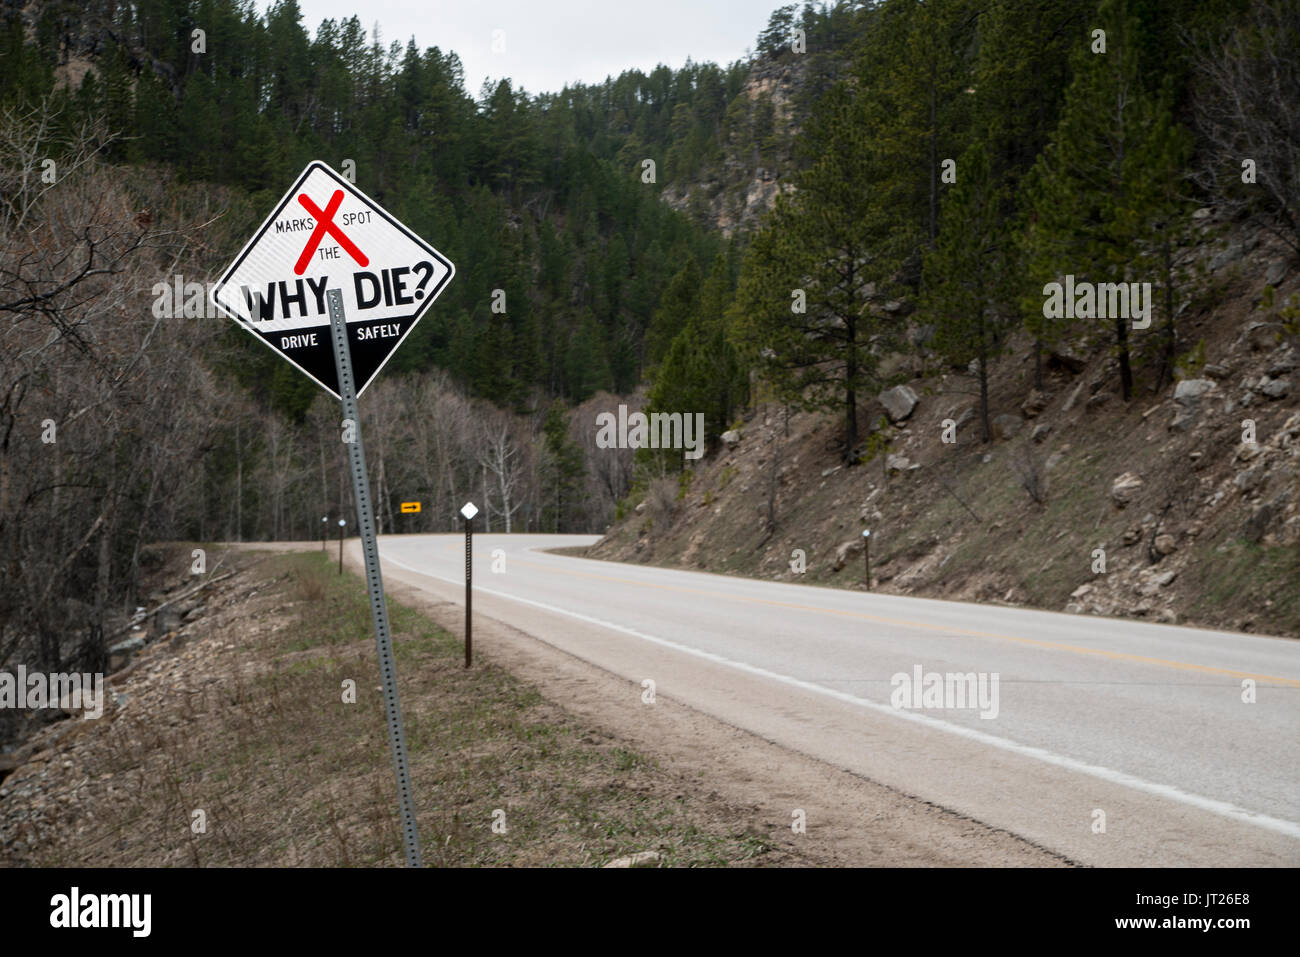 South Dakota. Spearfish Canyon. Why die highway sign to warn drivers to drive safely. Stock Photo